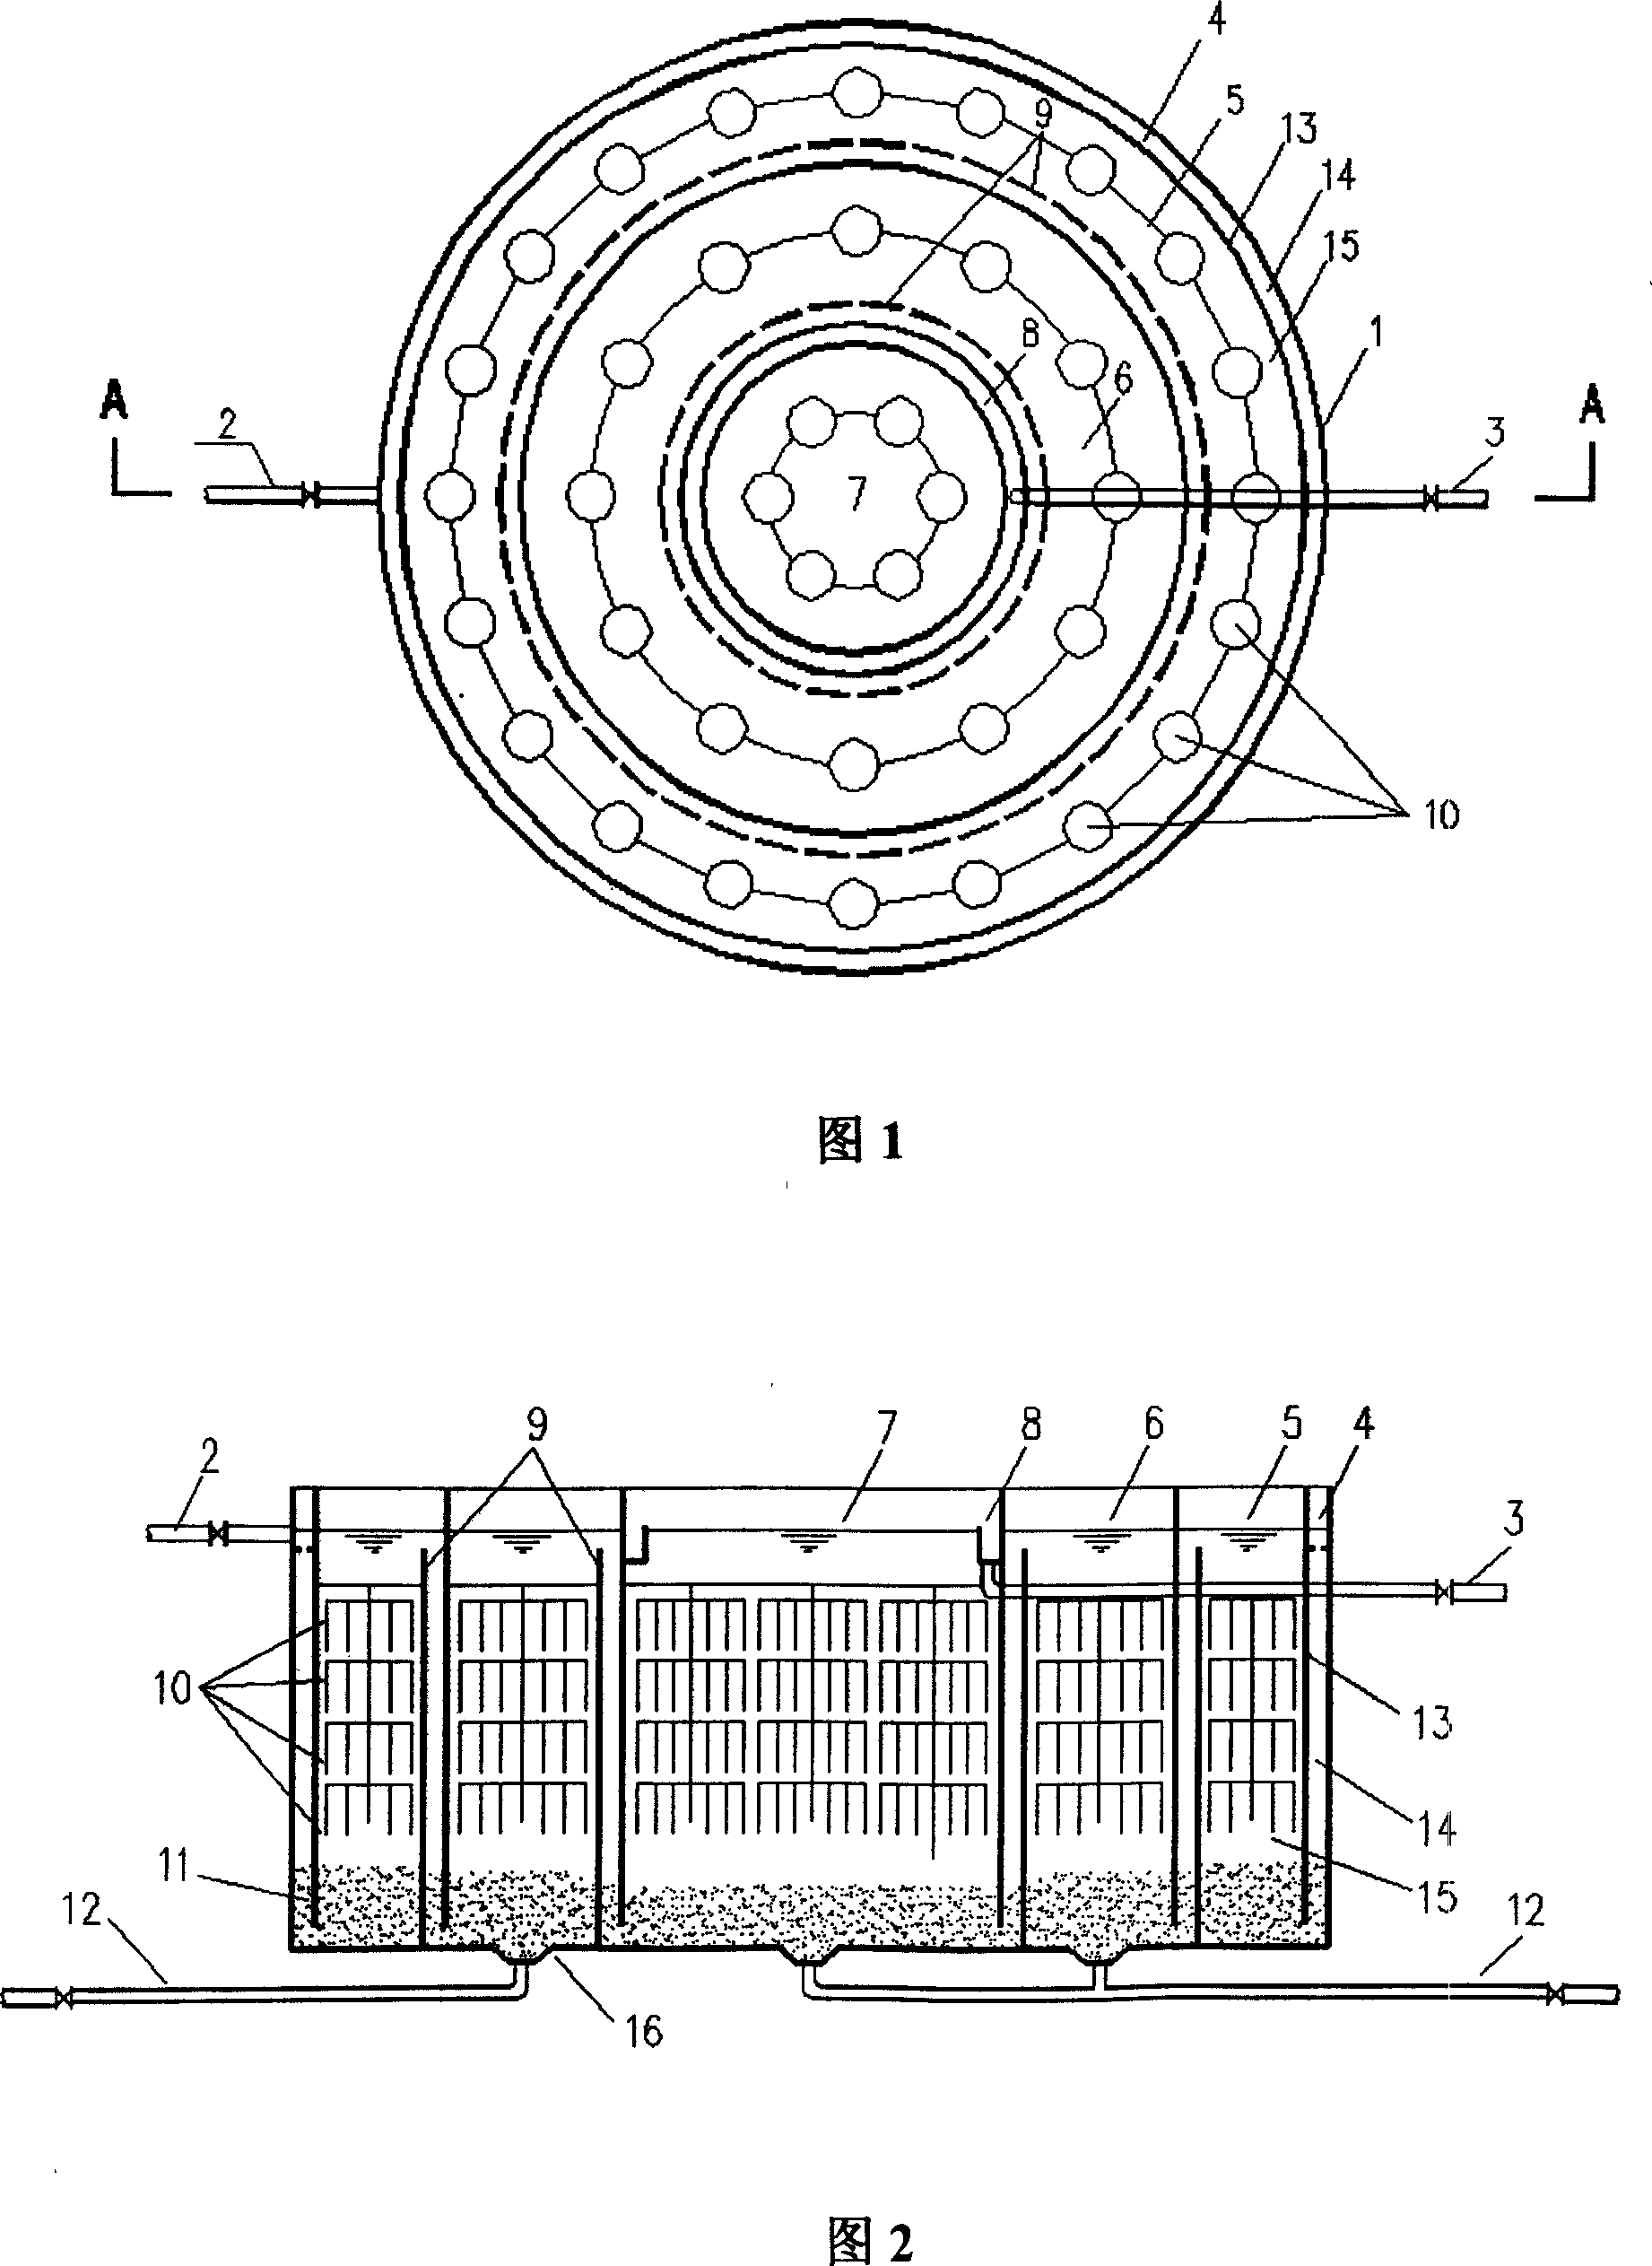 Peripherally-distributed water deflection composite reactor for hydrolysis and acidification